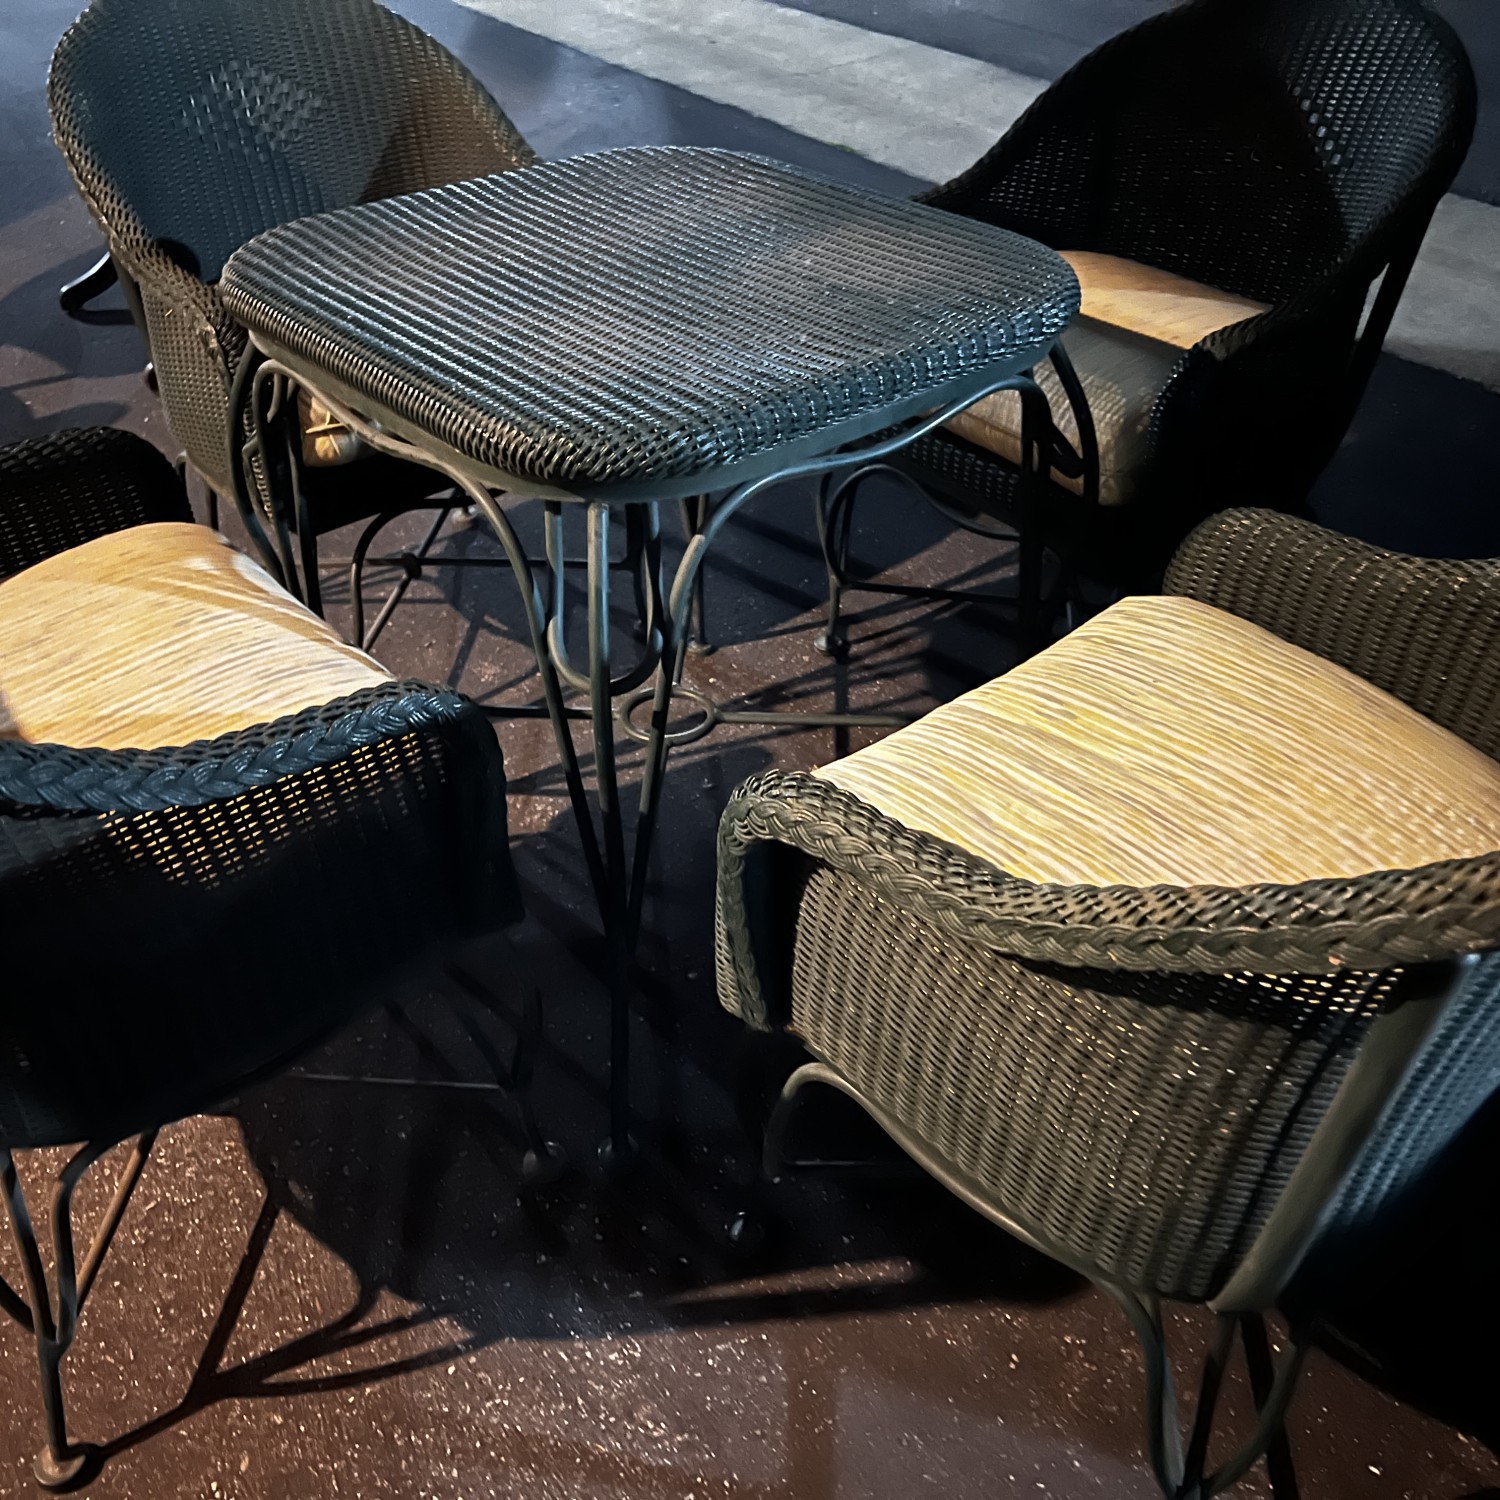 Marked down! Iron & Wicker balcony/patio set 4 chairs + 1 table